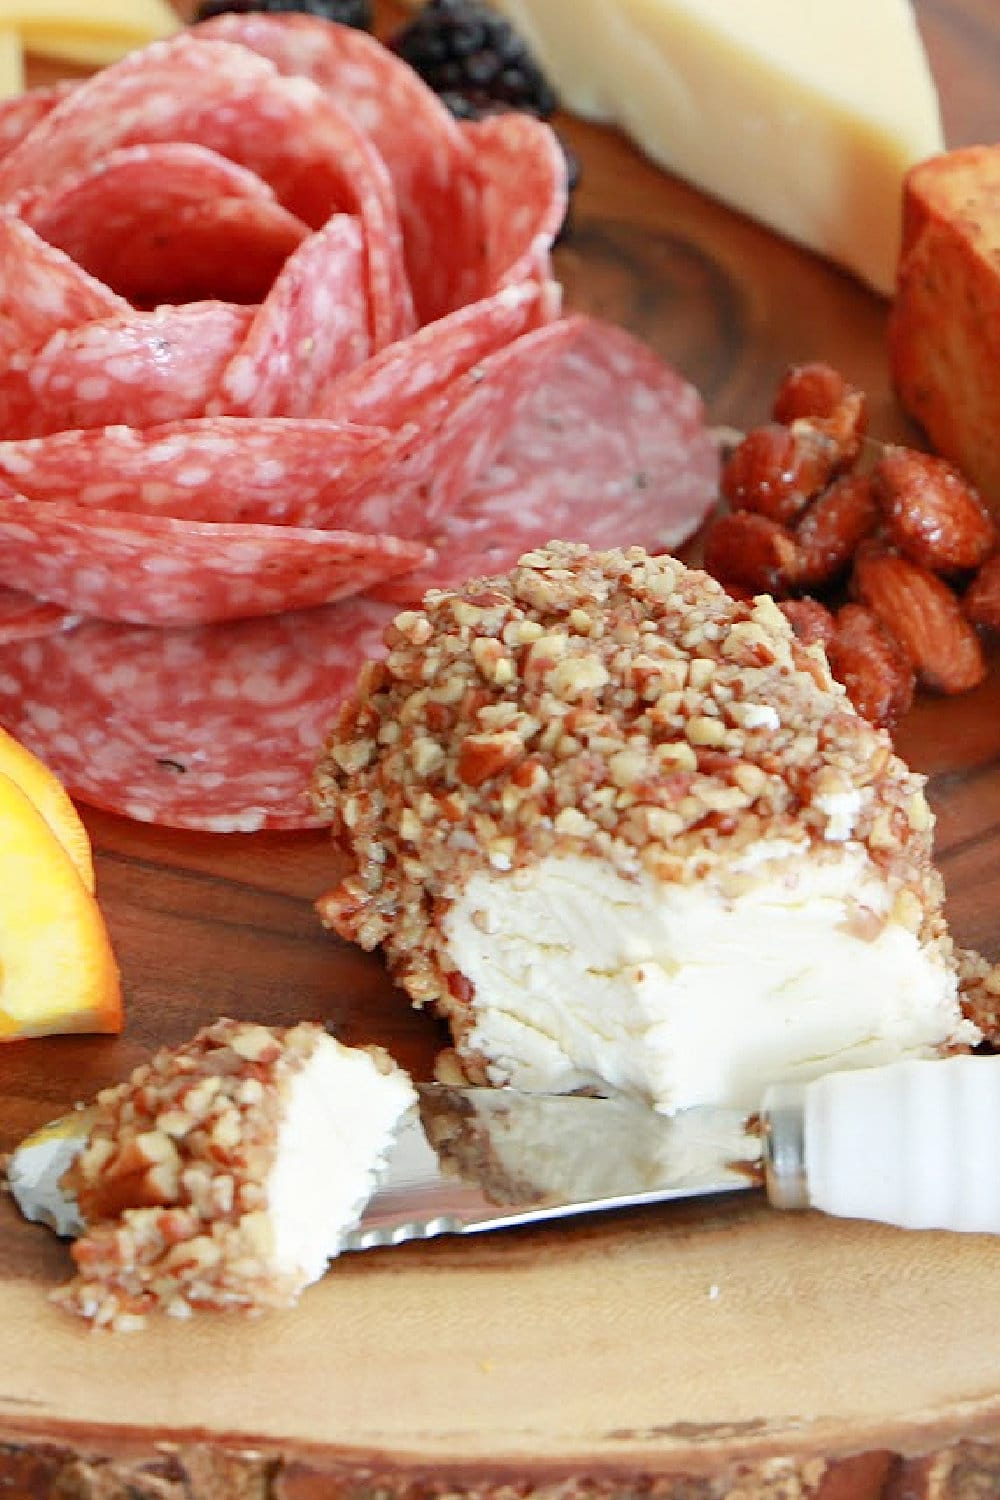 Ready to serve, Honey Pecan Goat Cheese Appetizer as part of a charcuterie board. 